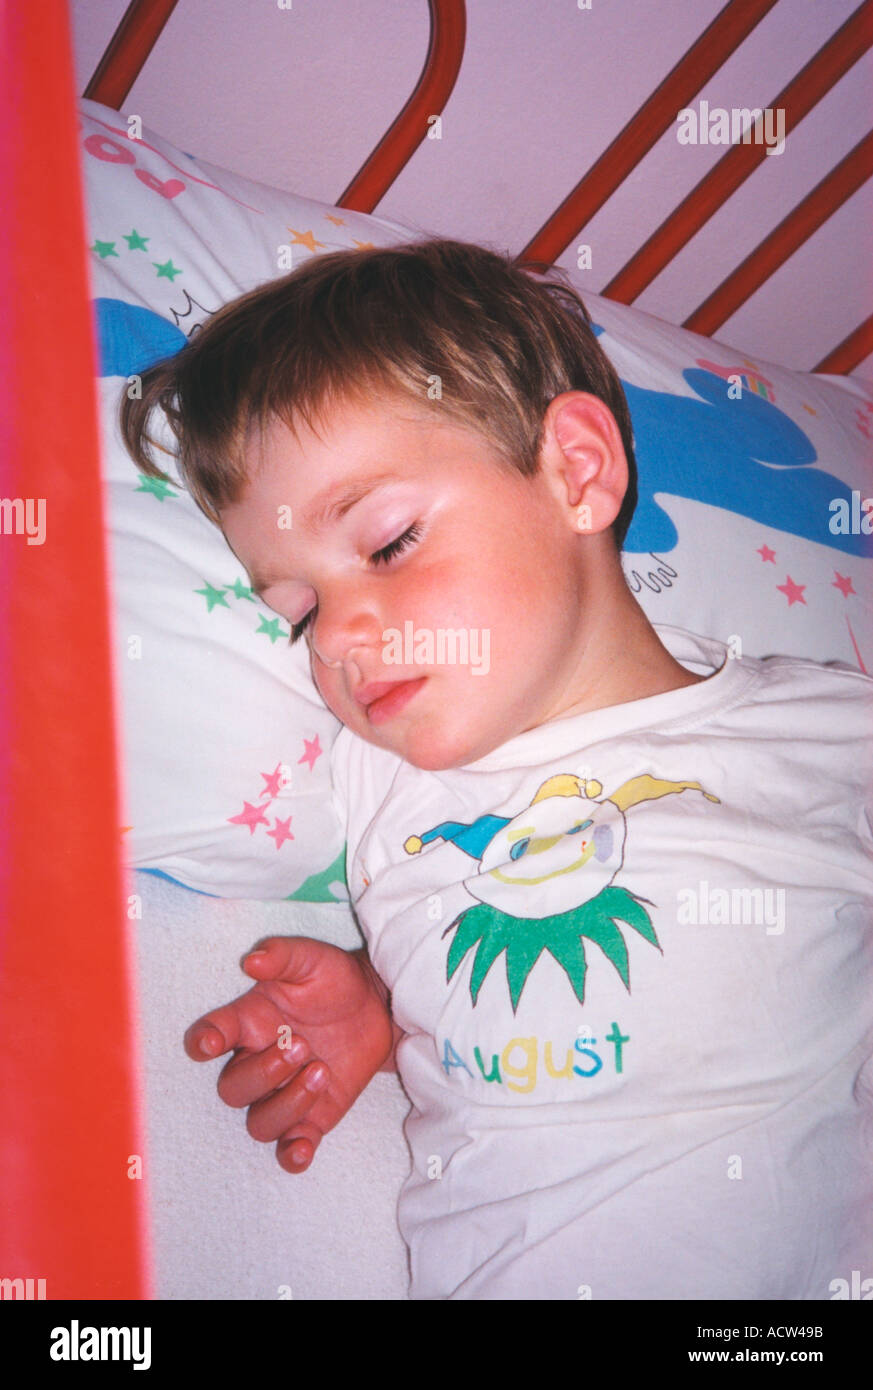 child fast asleep in bed Stock Photo